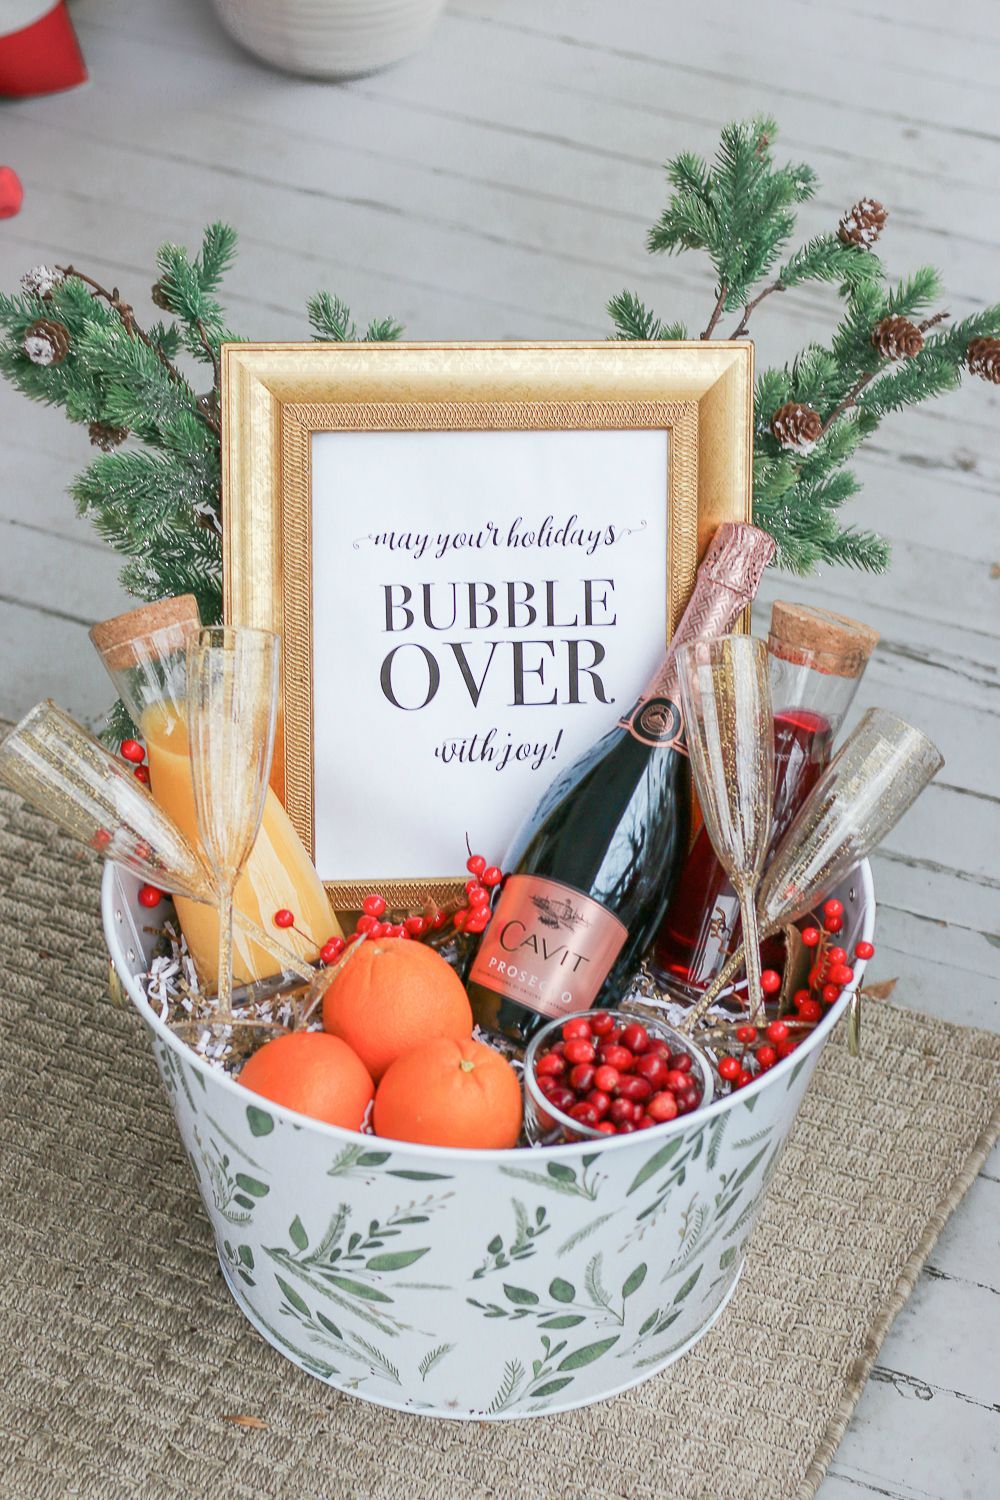 The Top 33 Gifts for In-Laws When You're Feeling Stumped